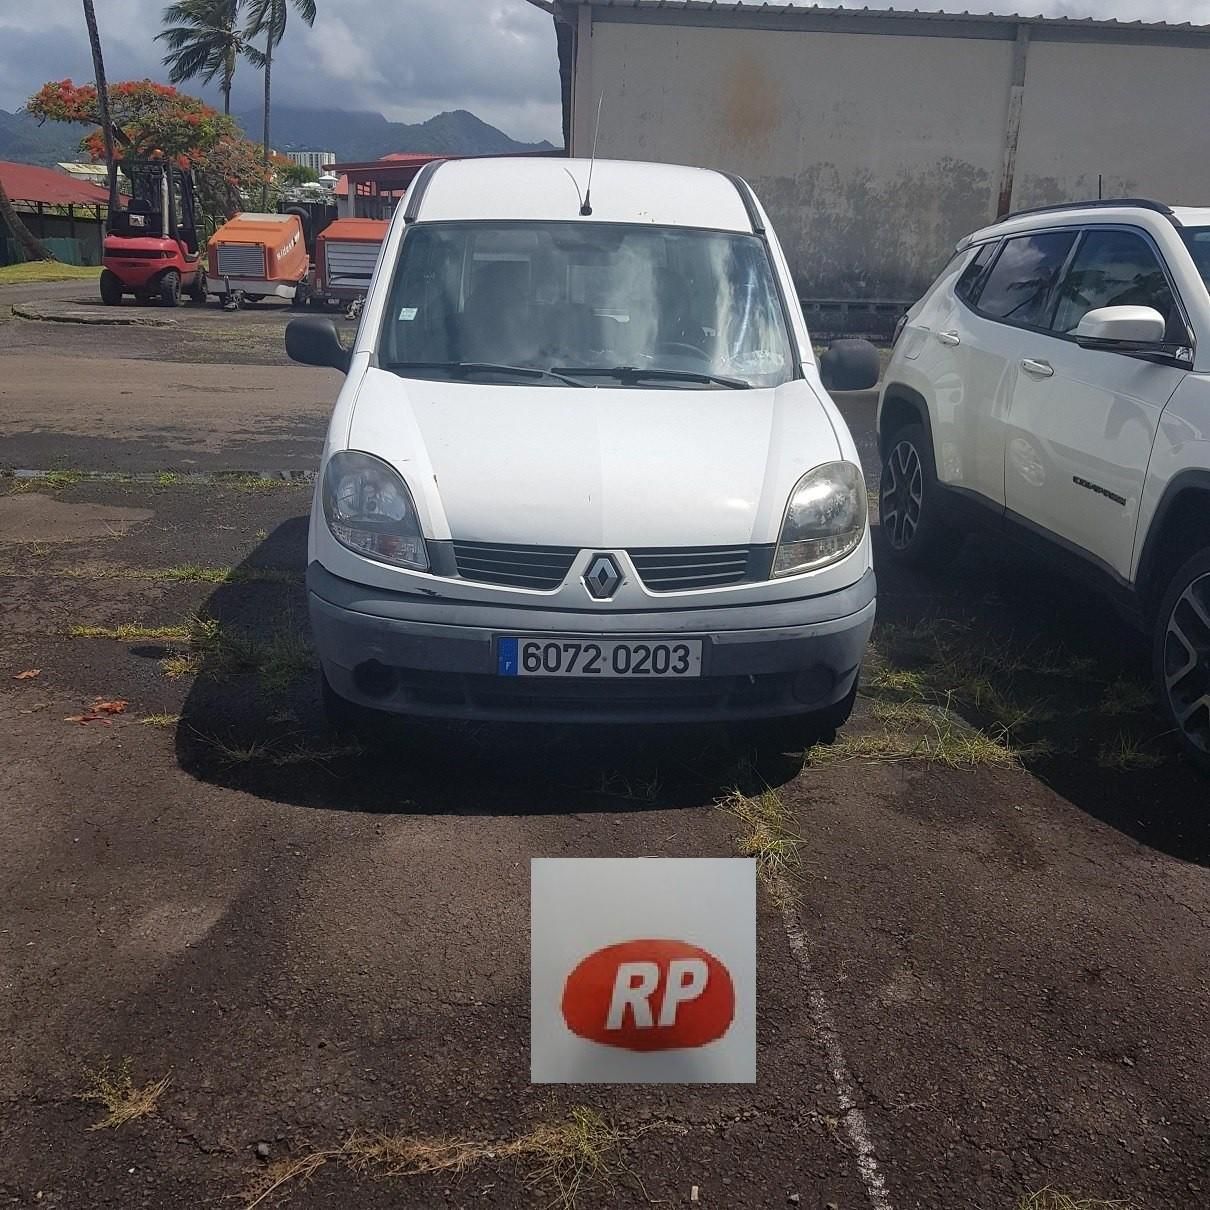 Null [RP][ACI] 2106MARTBR00378

	 
Reserved for professionals.
	 Renault Kangoo &hellip;